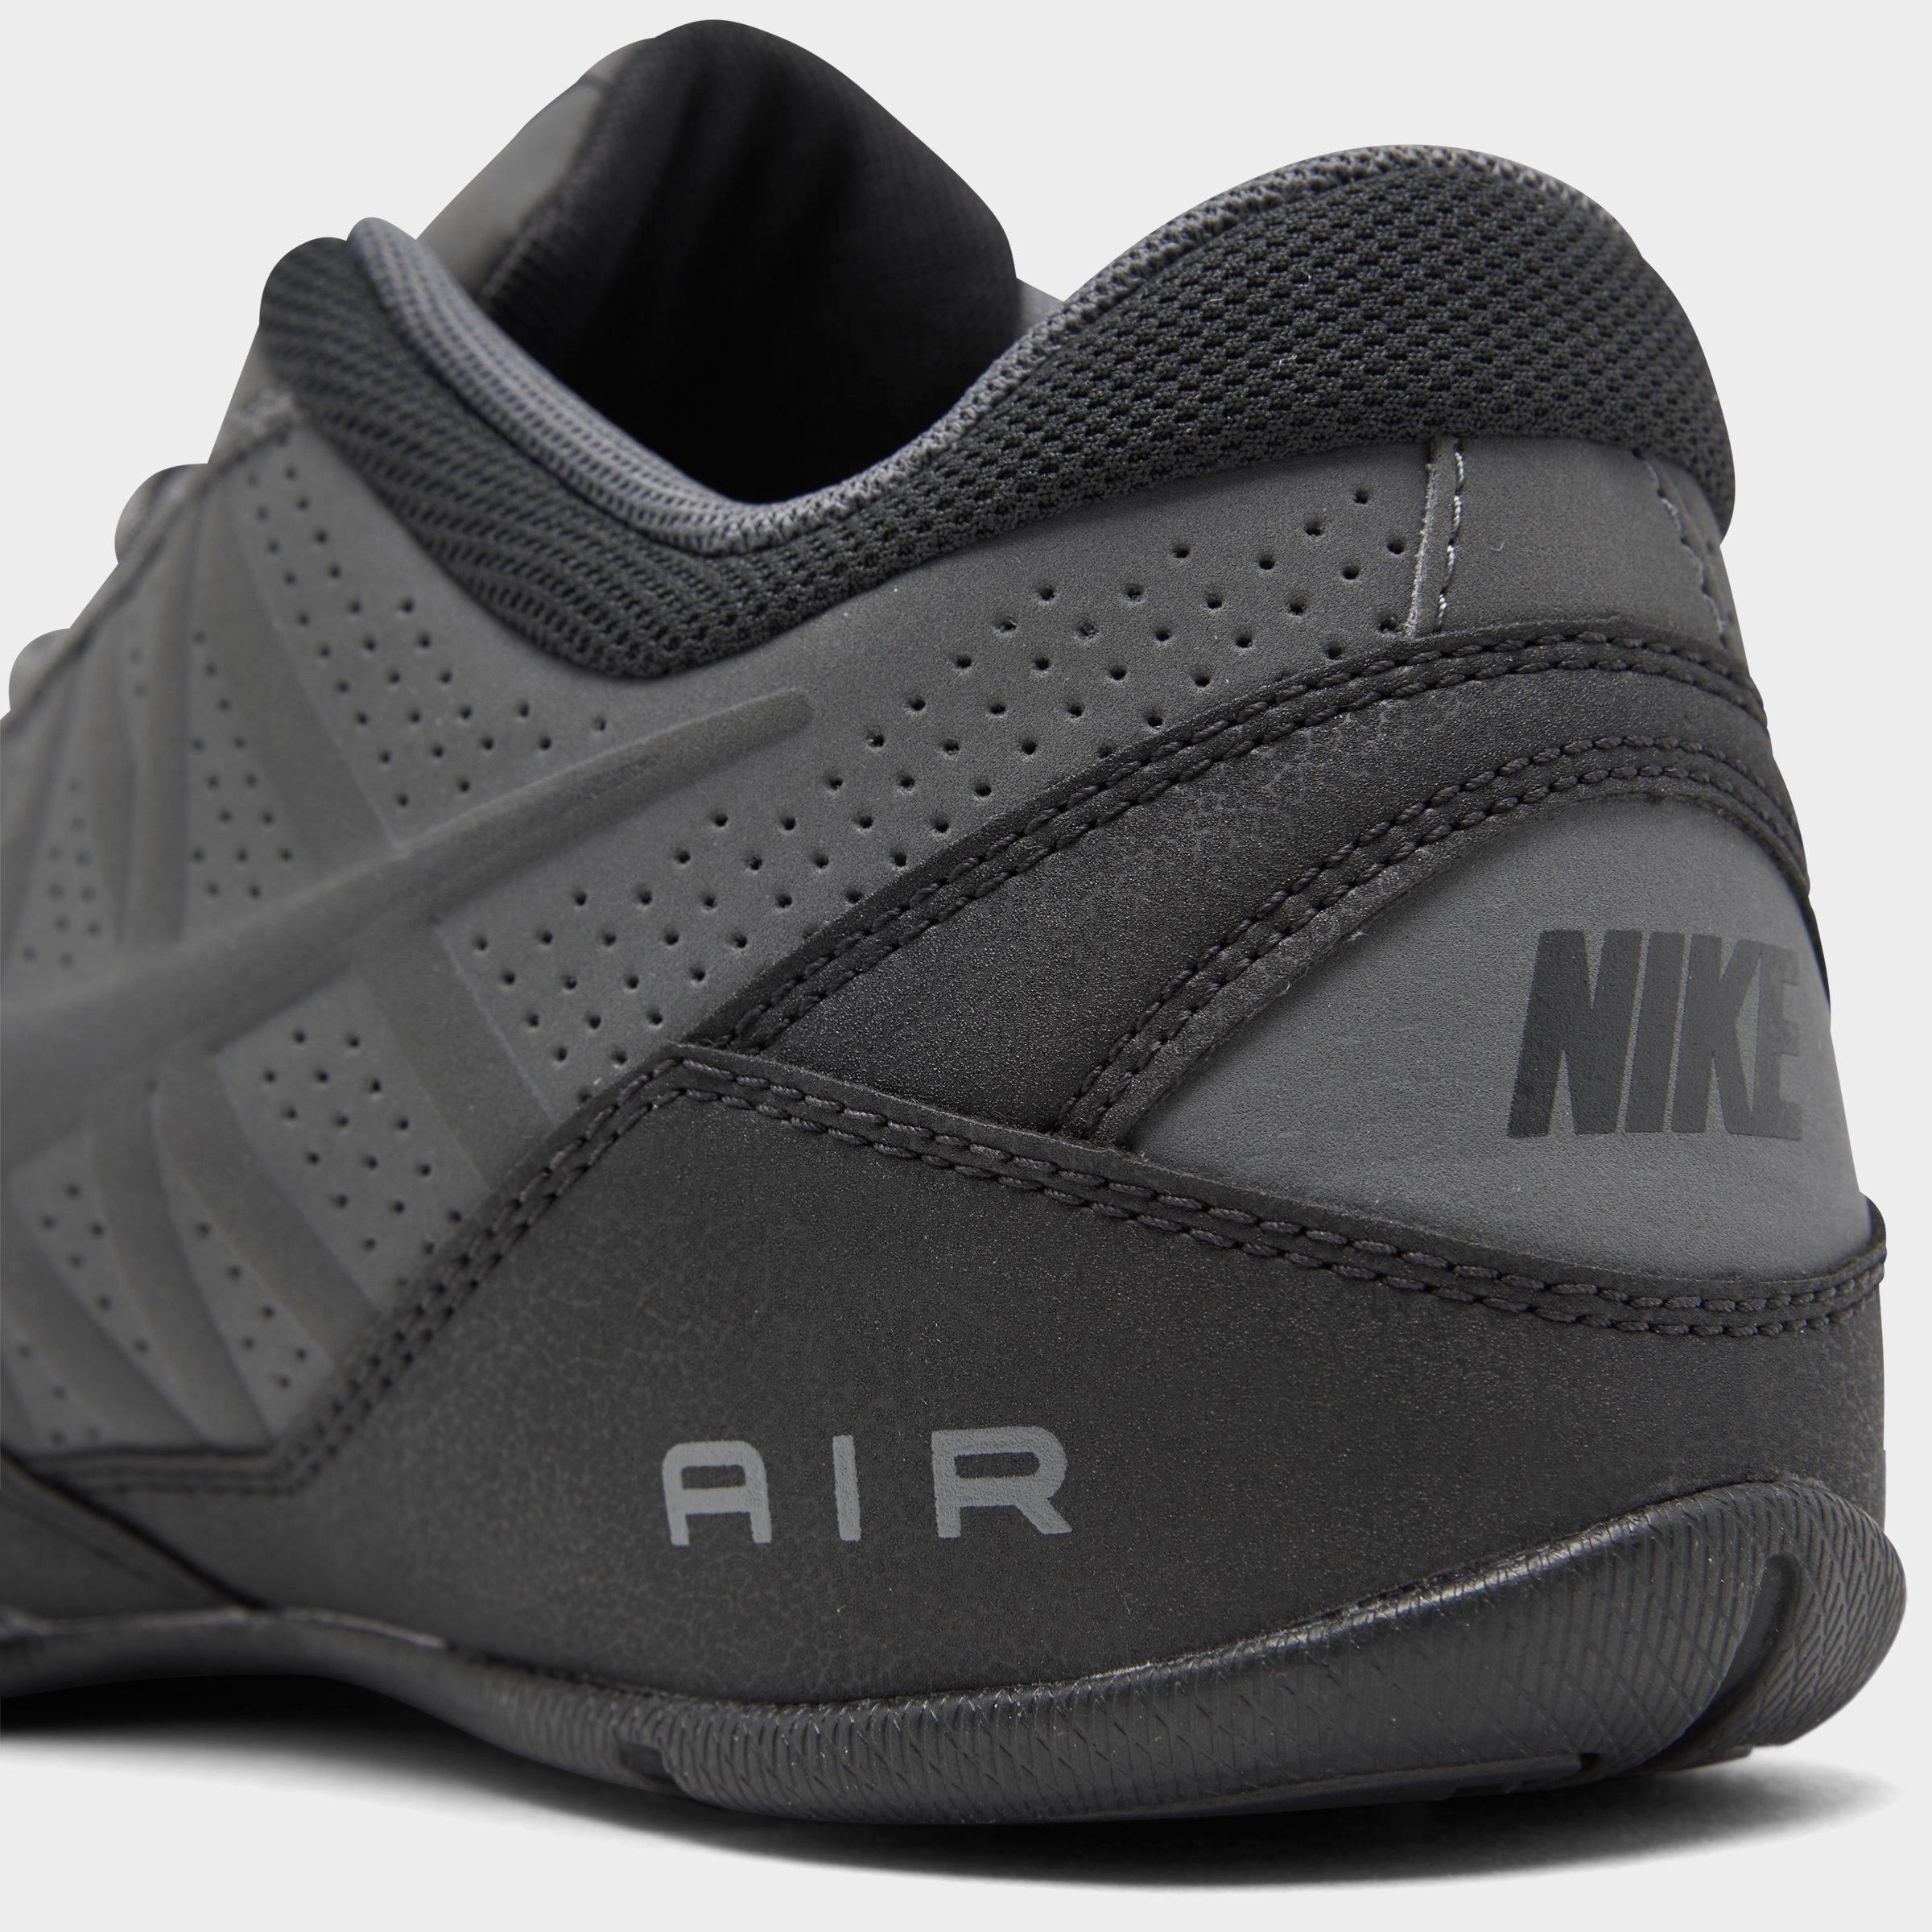 nike ring leader shoes